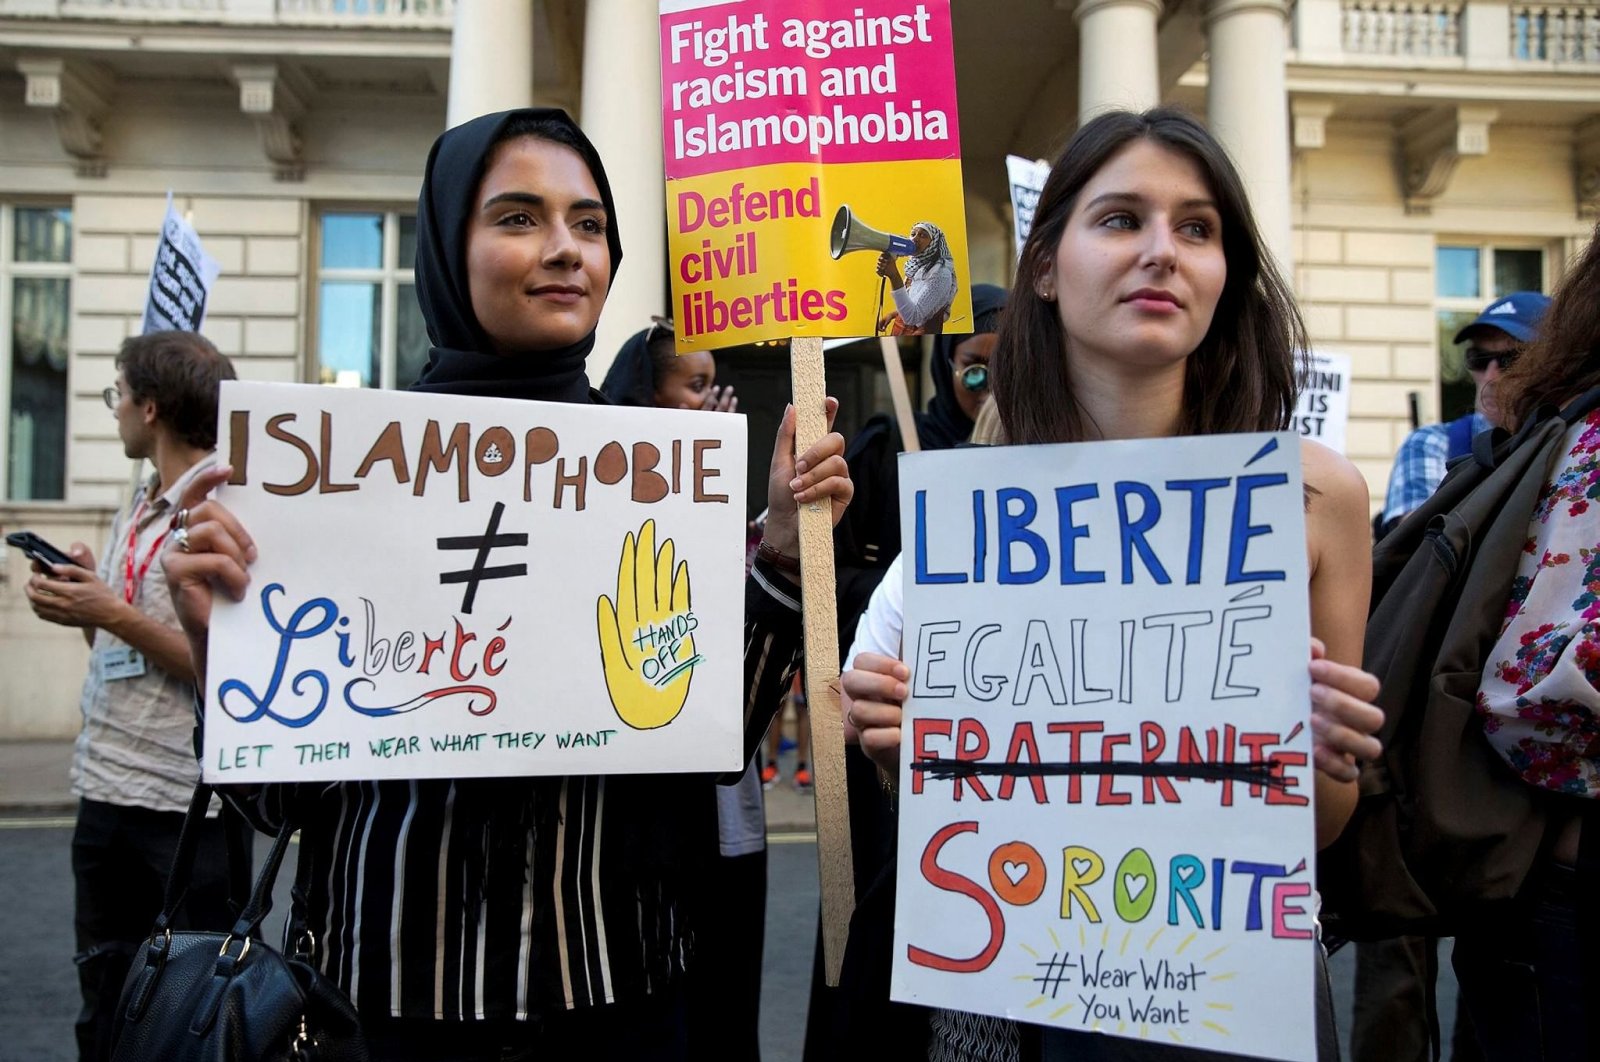 Women join a demonstration organized by &quot;Stand up to Racism&quot; outside the French embassy in London, Aug. 26, 2016. (Getty Images, File)